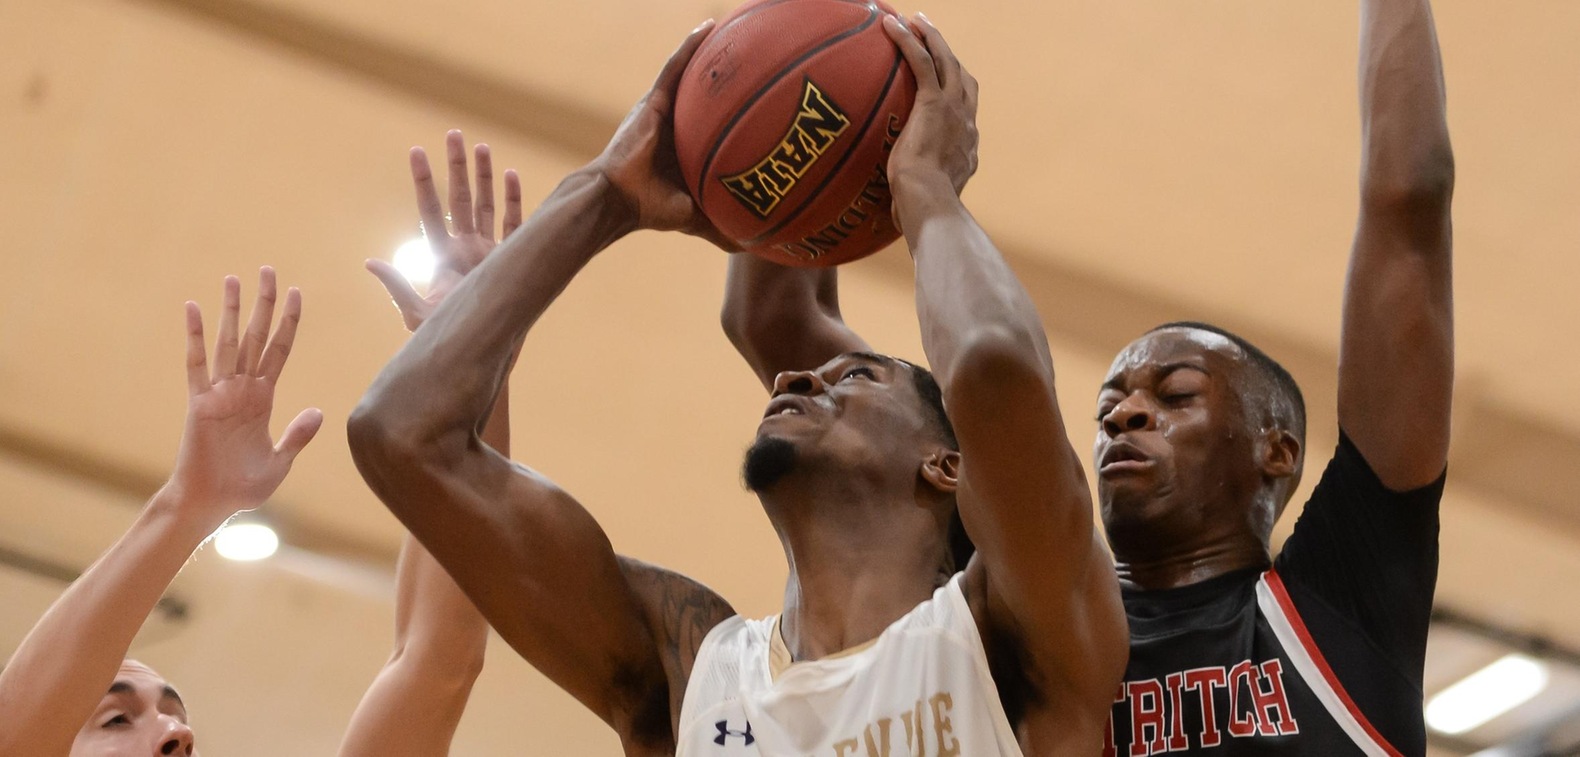 Justin Motley scored 13 points and grabbed nine rebounds in BU's win over Westcliff.